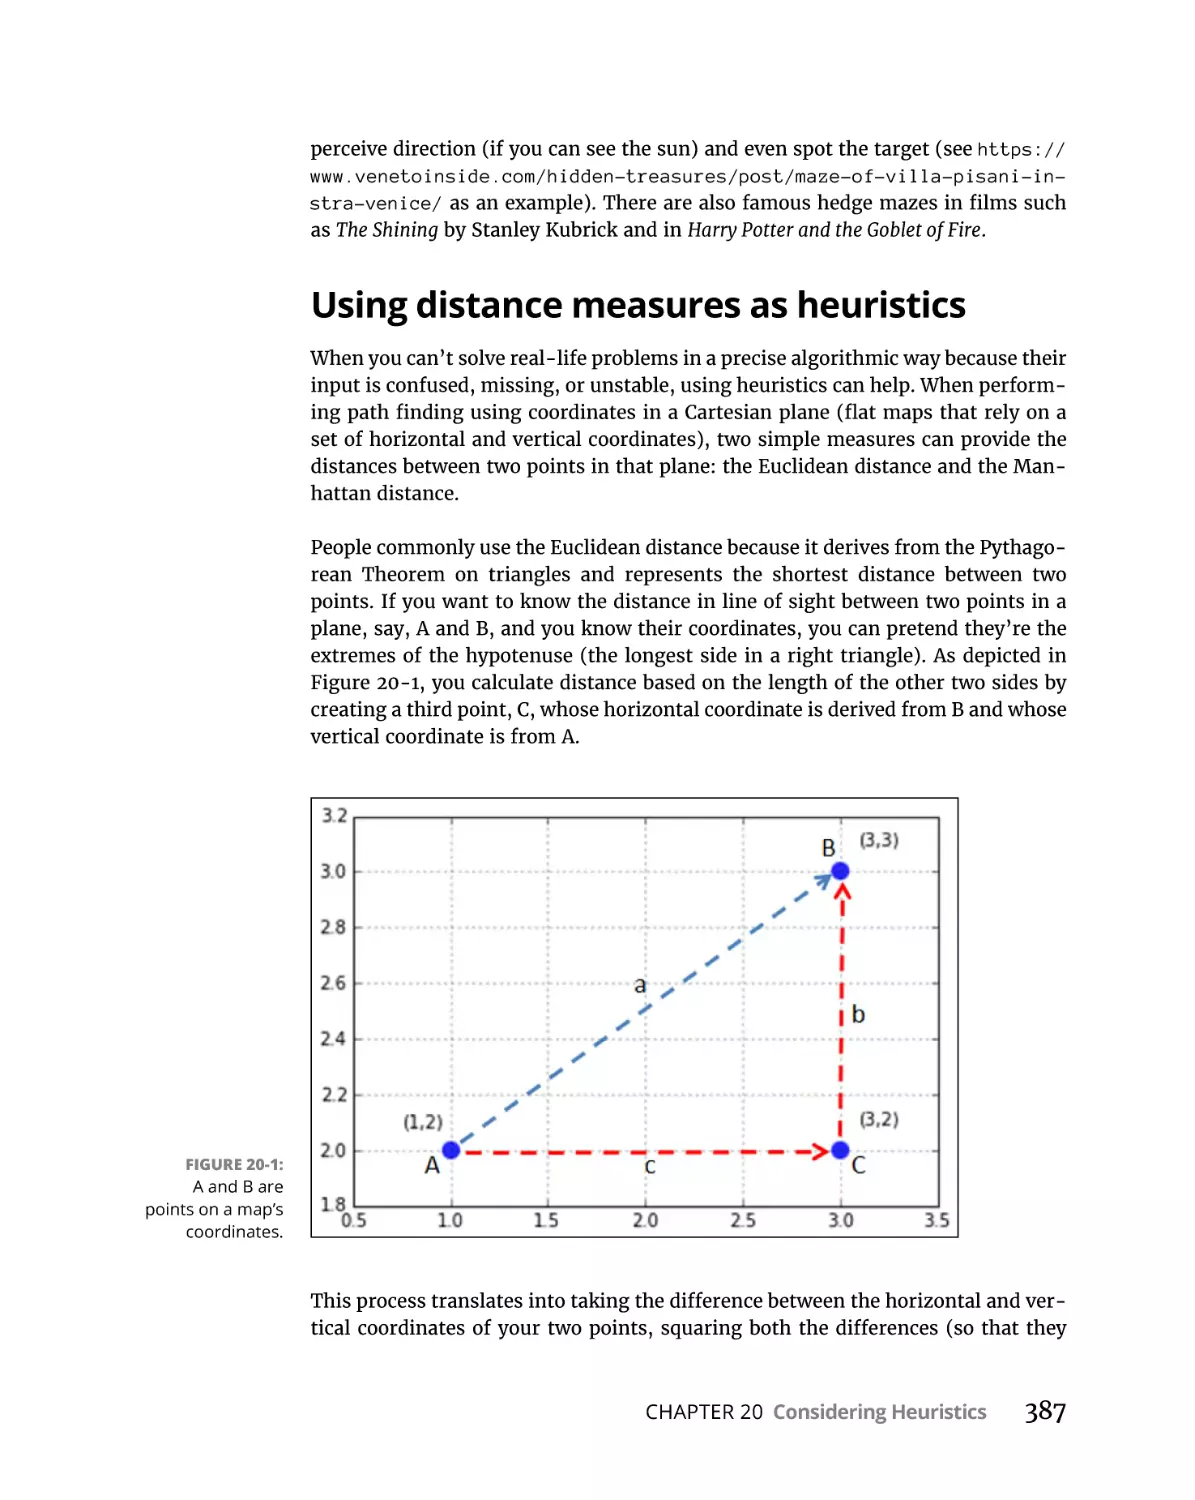 Using distance measures as heuristics